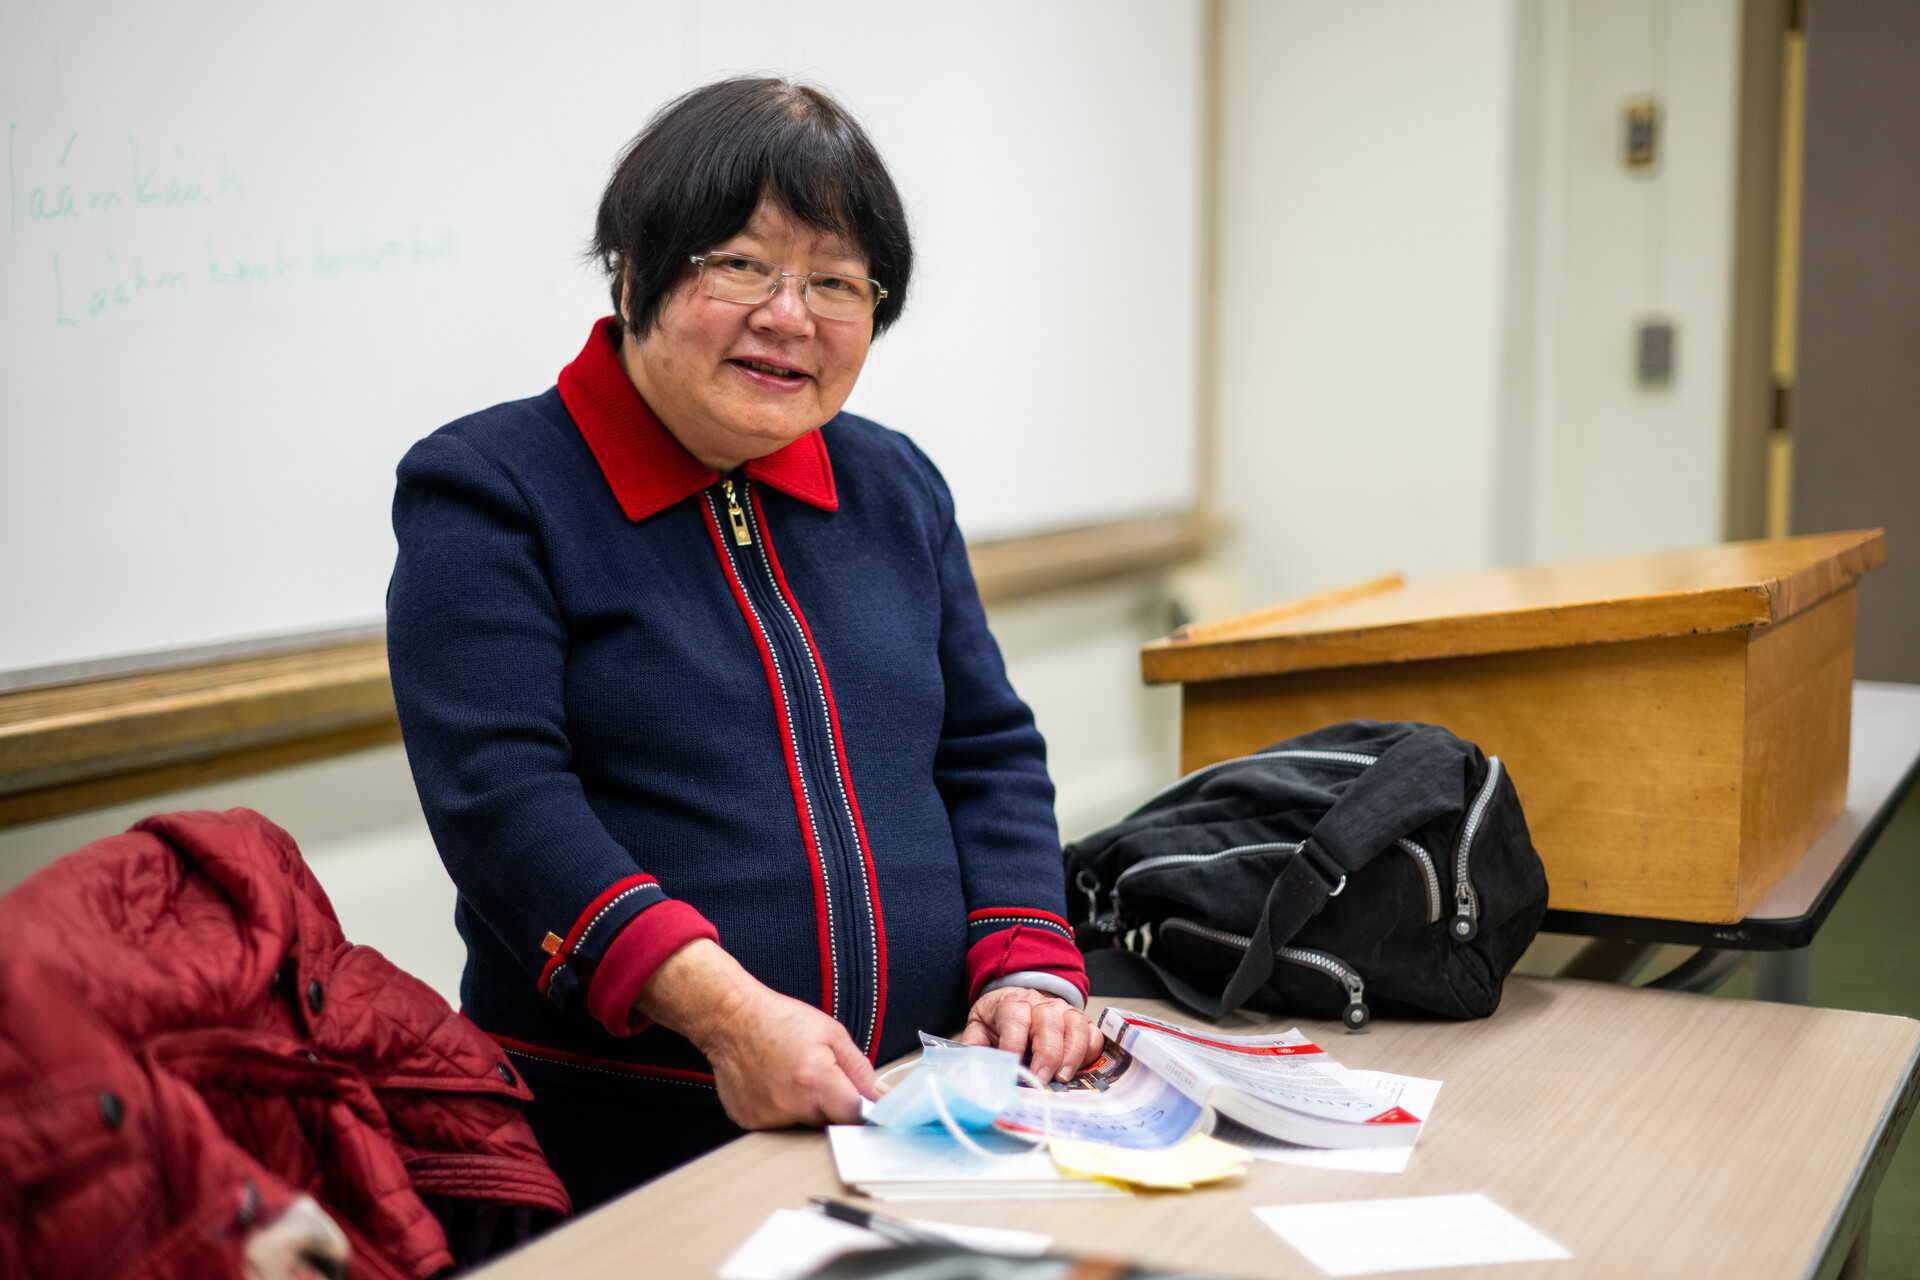 Middle-aged Asian woman wearing a blue and red zip-up top smiles as she stands behind a desk in a classroom with a white board behind her